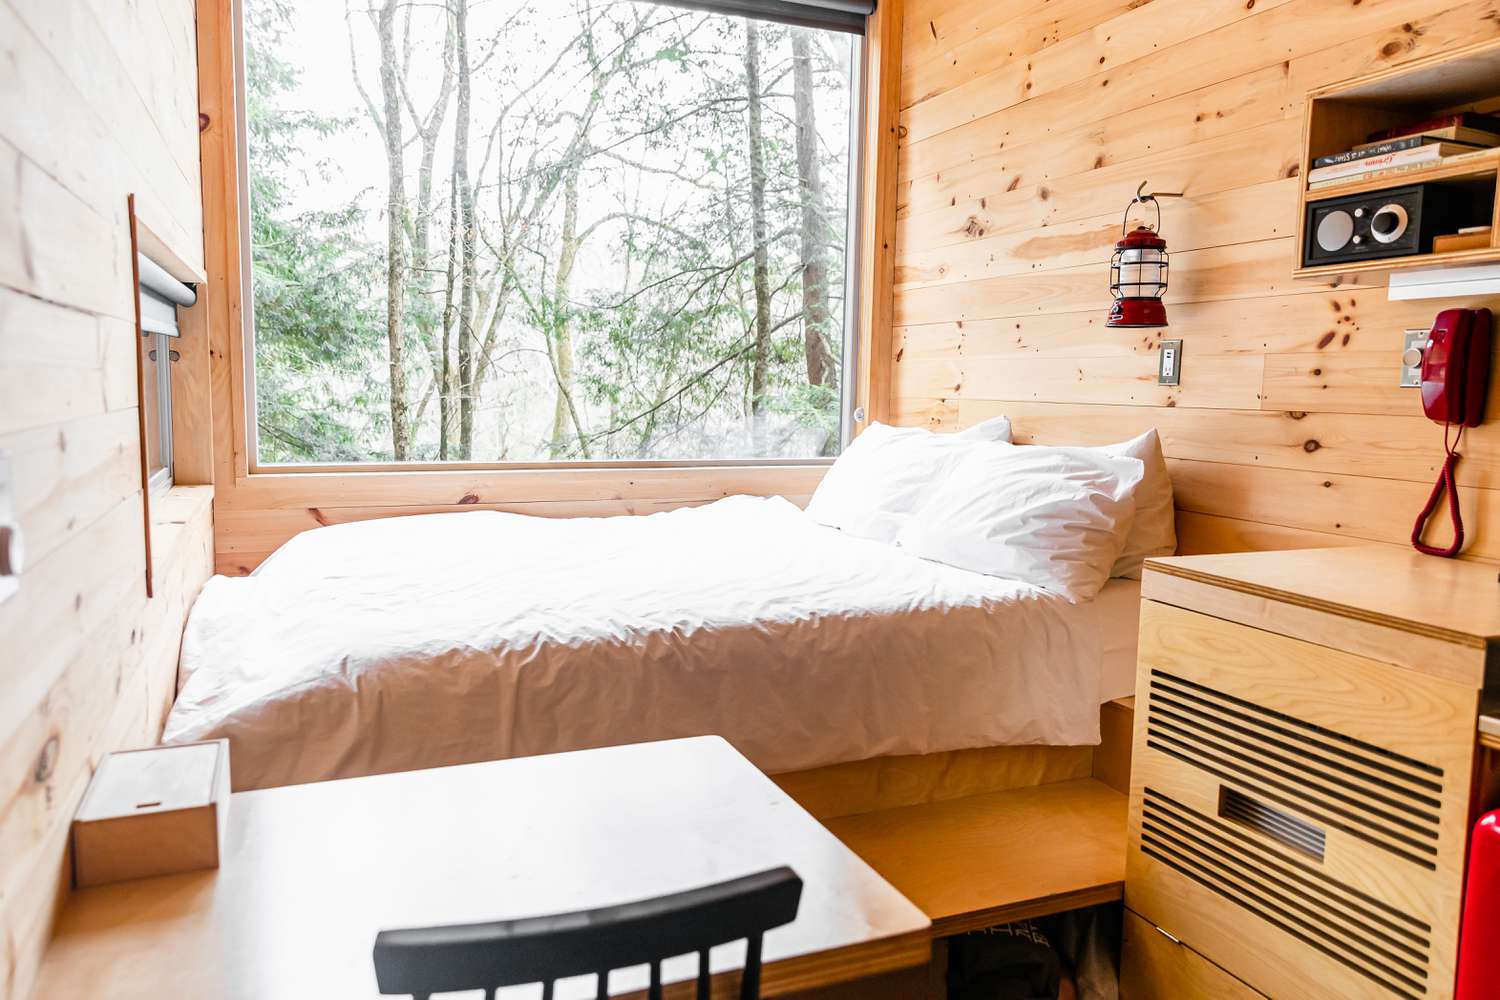 Wooden tiny home with bed next to large window showing trees